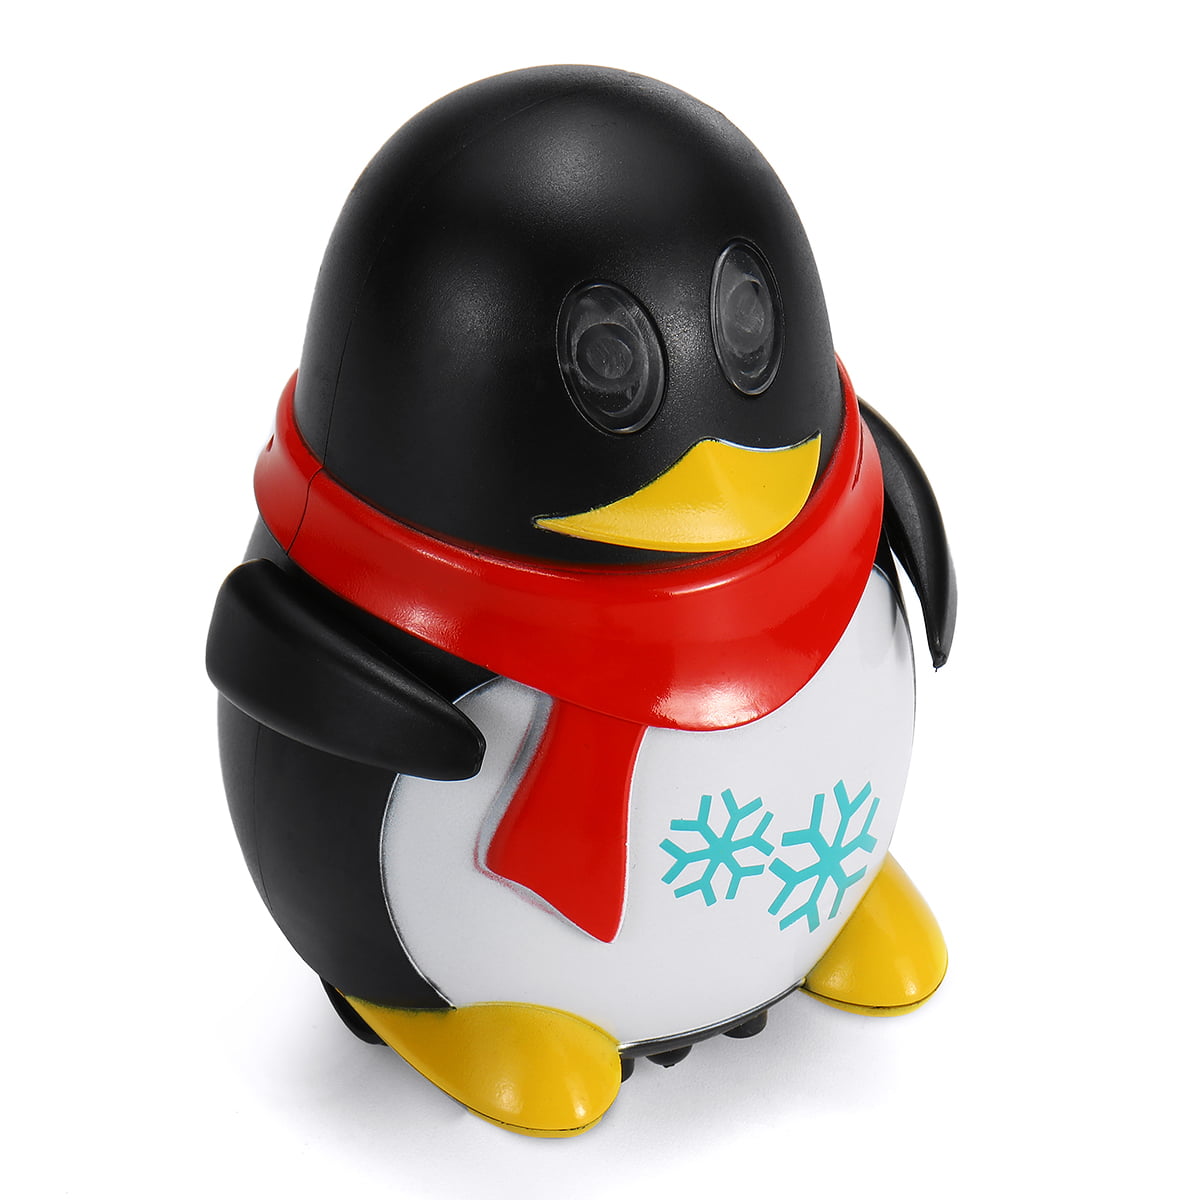 Pen Induction Robot Toy Penguin LED Drawn Line Kid Gift Car Education Creations 